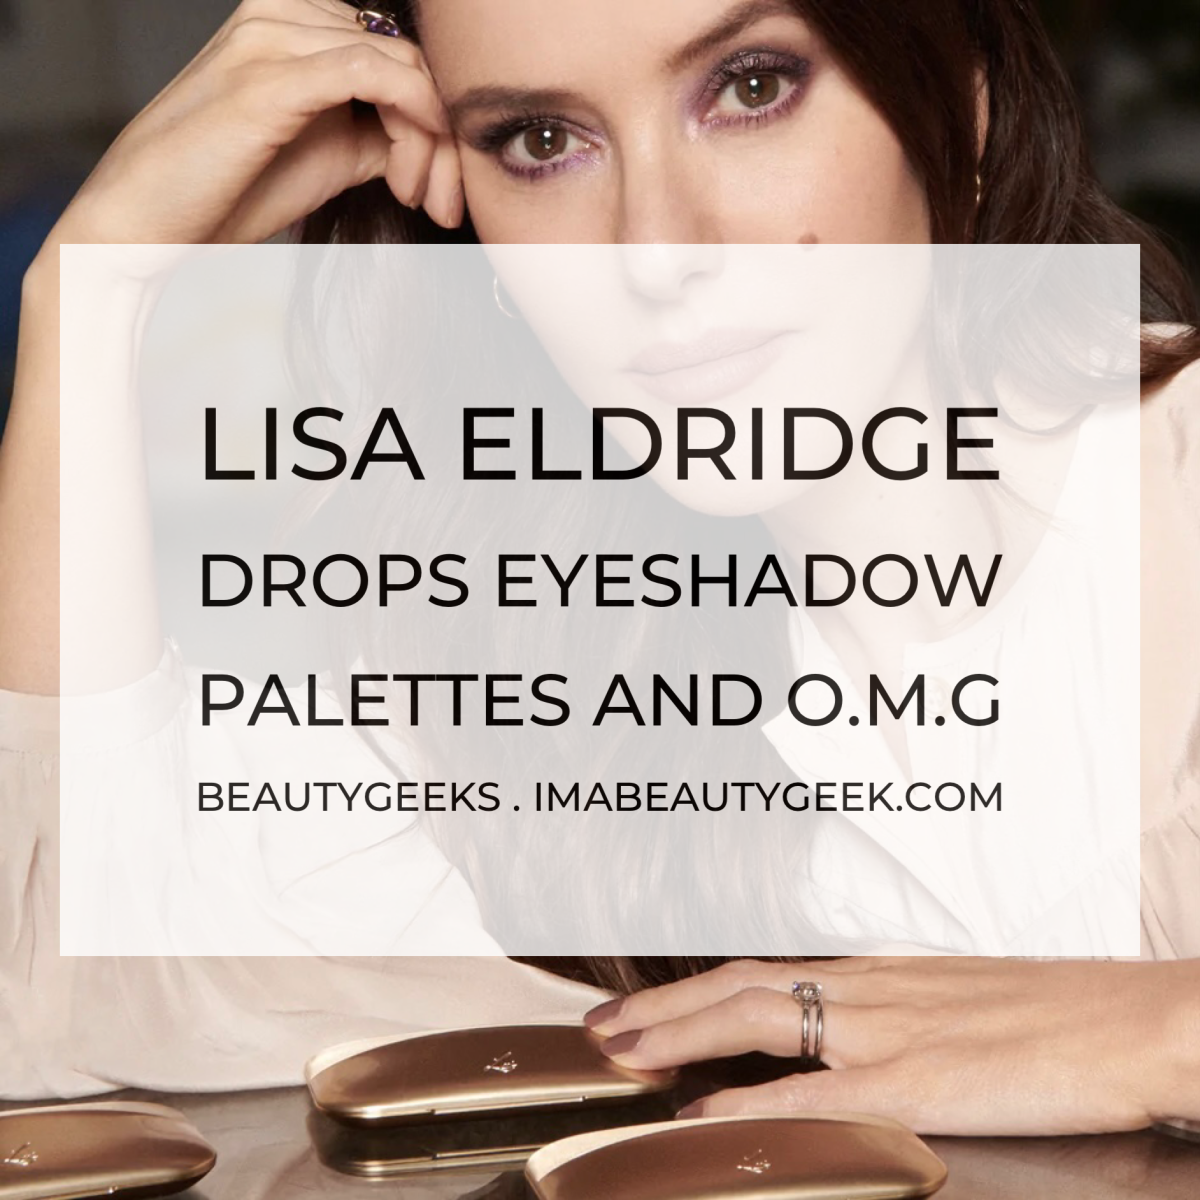 Lisa Eldridge launches her first eyeshadow palettes today